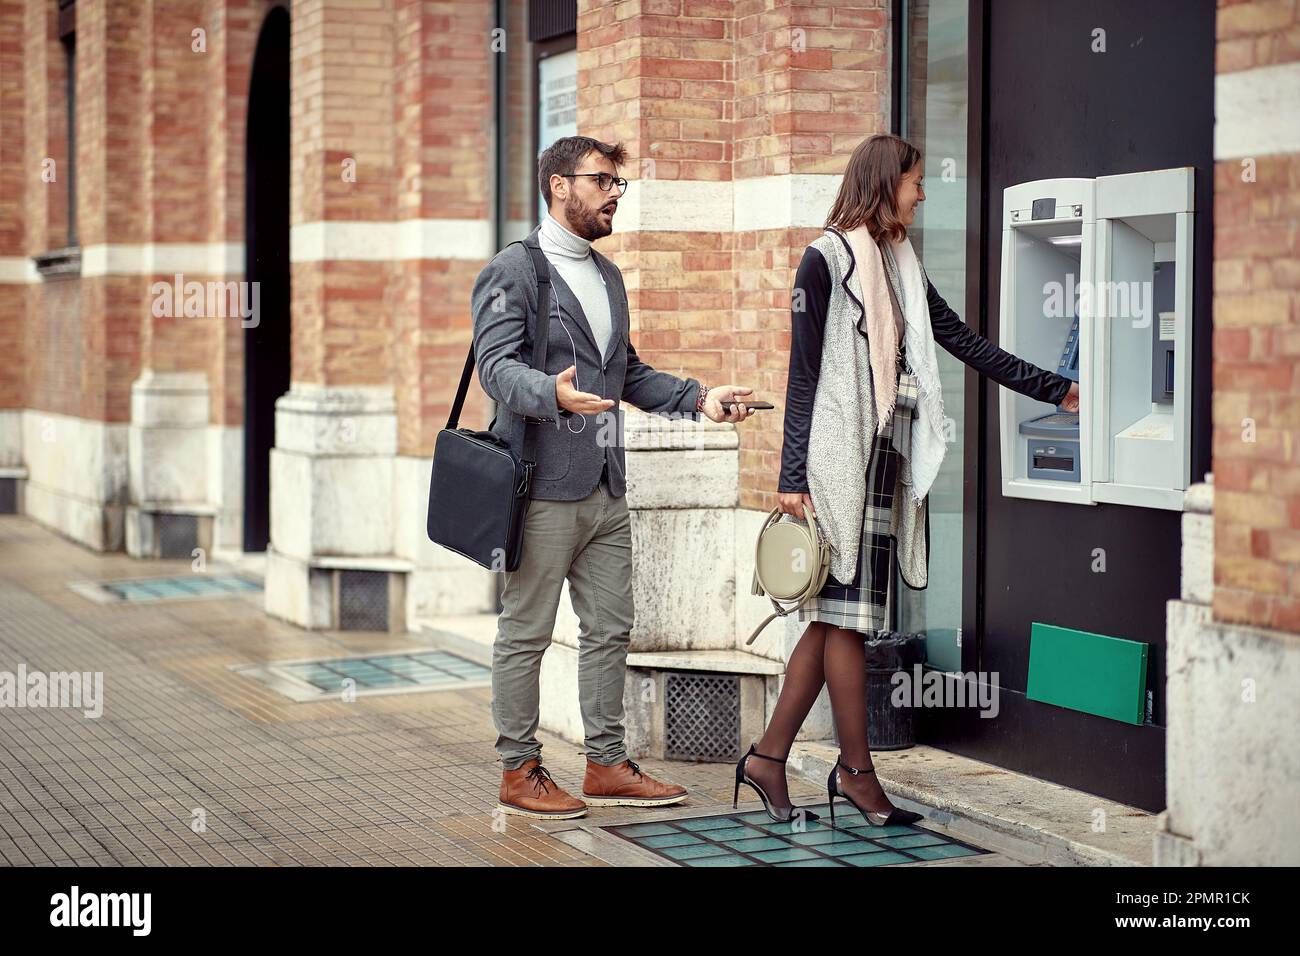 Impatient man protest in front cash machine while woman takes her money Stock Photo